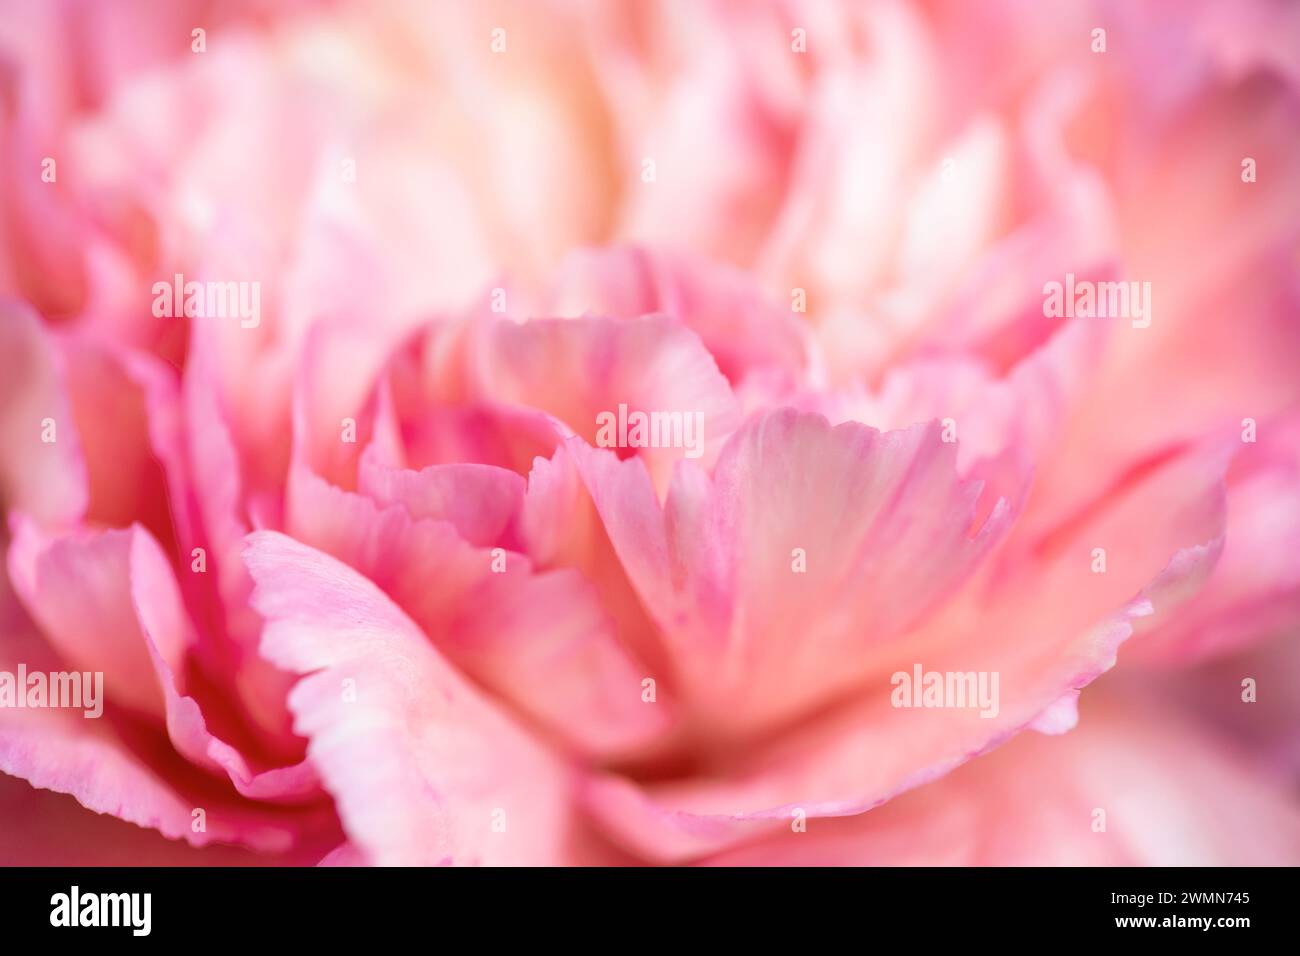 Extreme close up of a pink peony flower,floral abstract background Stock Photo